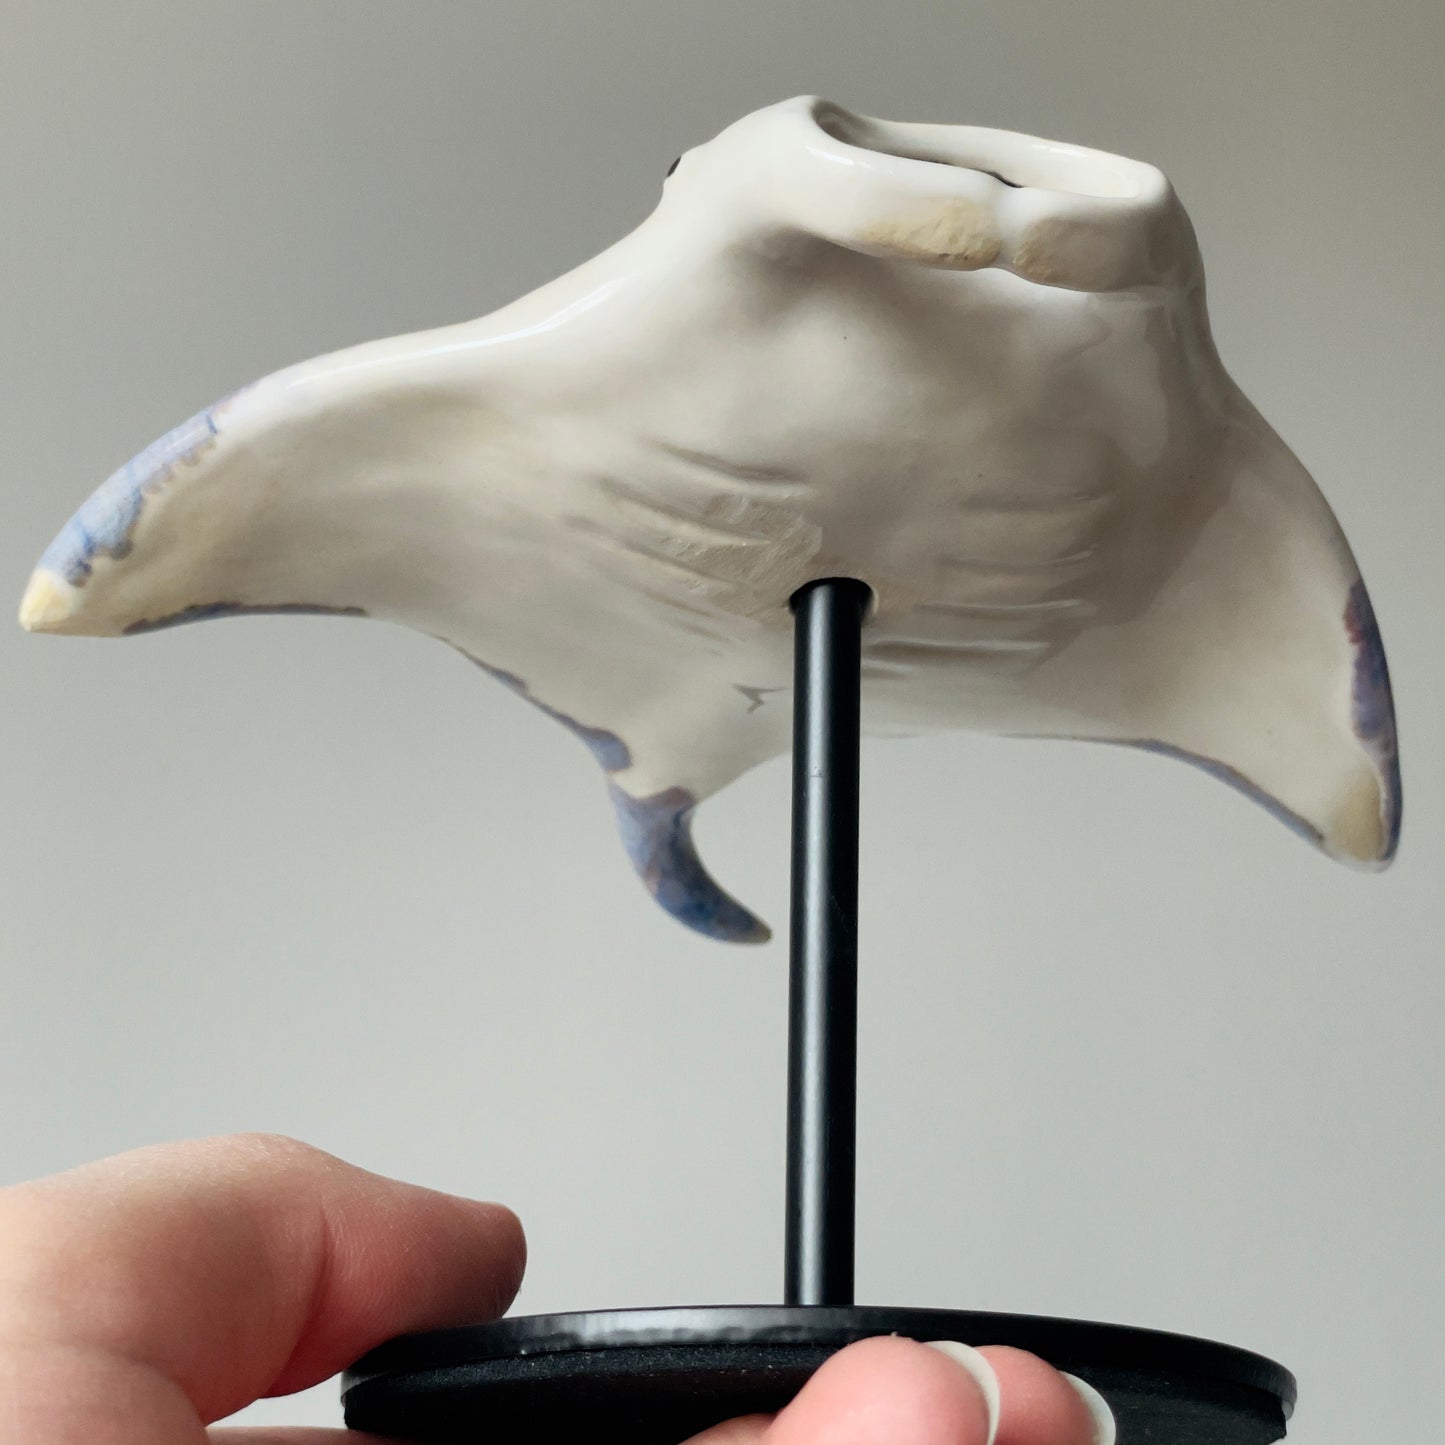 Manta Ray on a metal stand